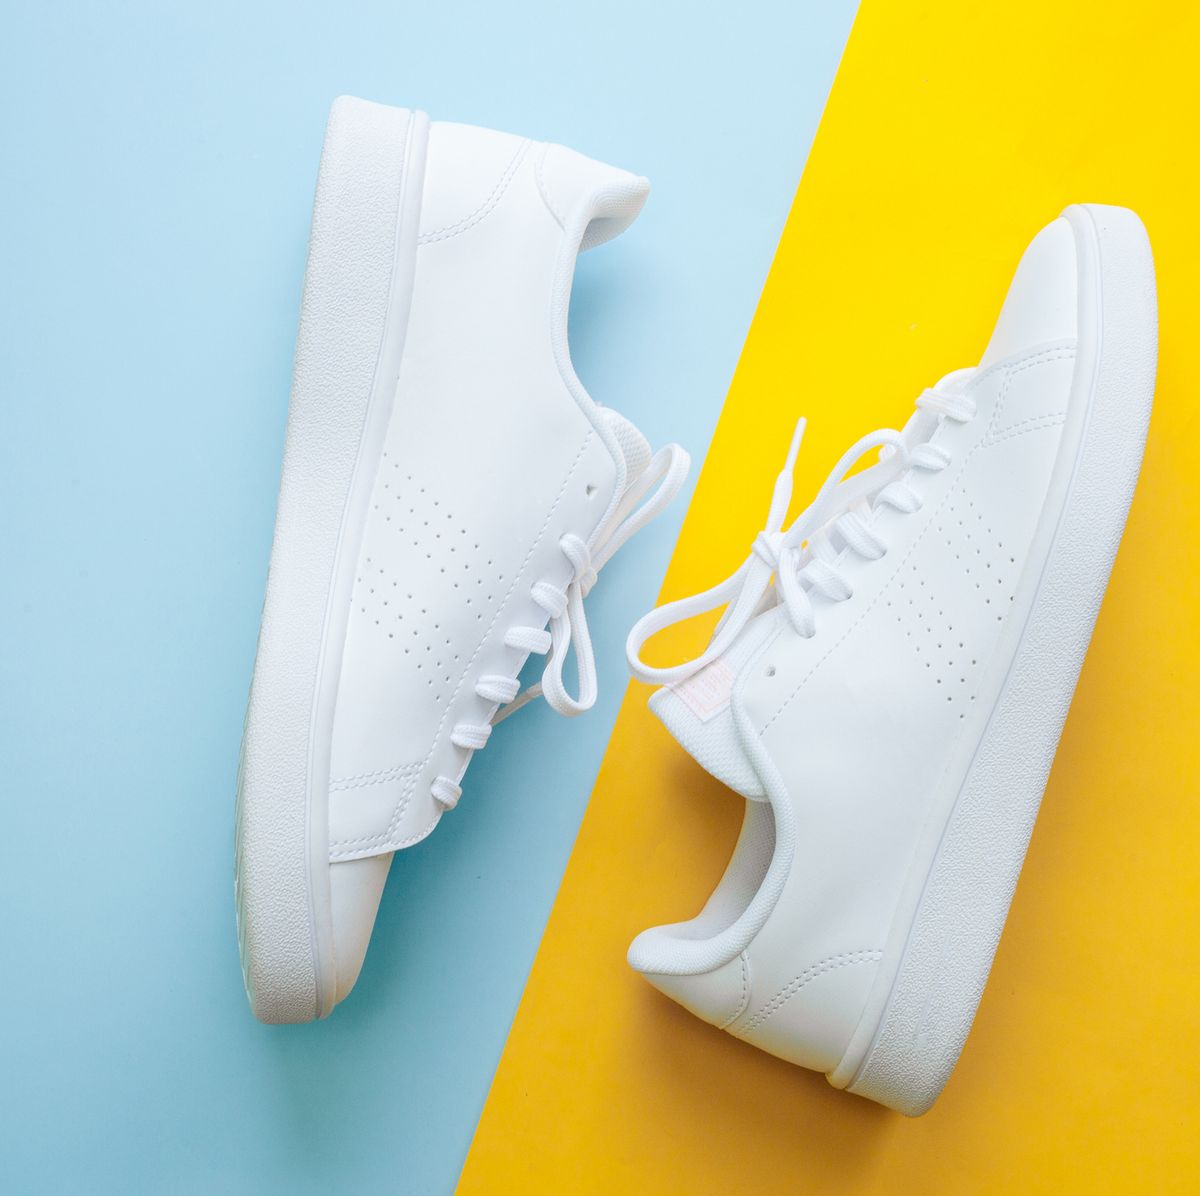 How to Clean White Shoes: 4 Totally Tested Methods